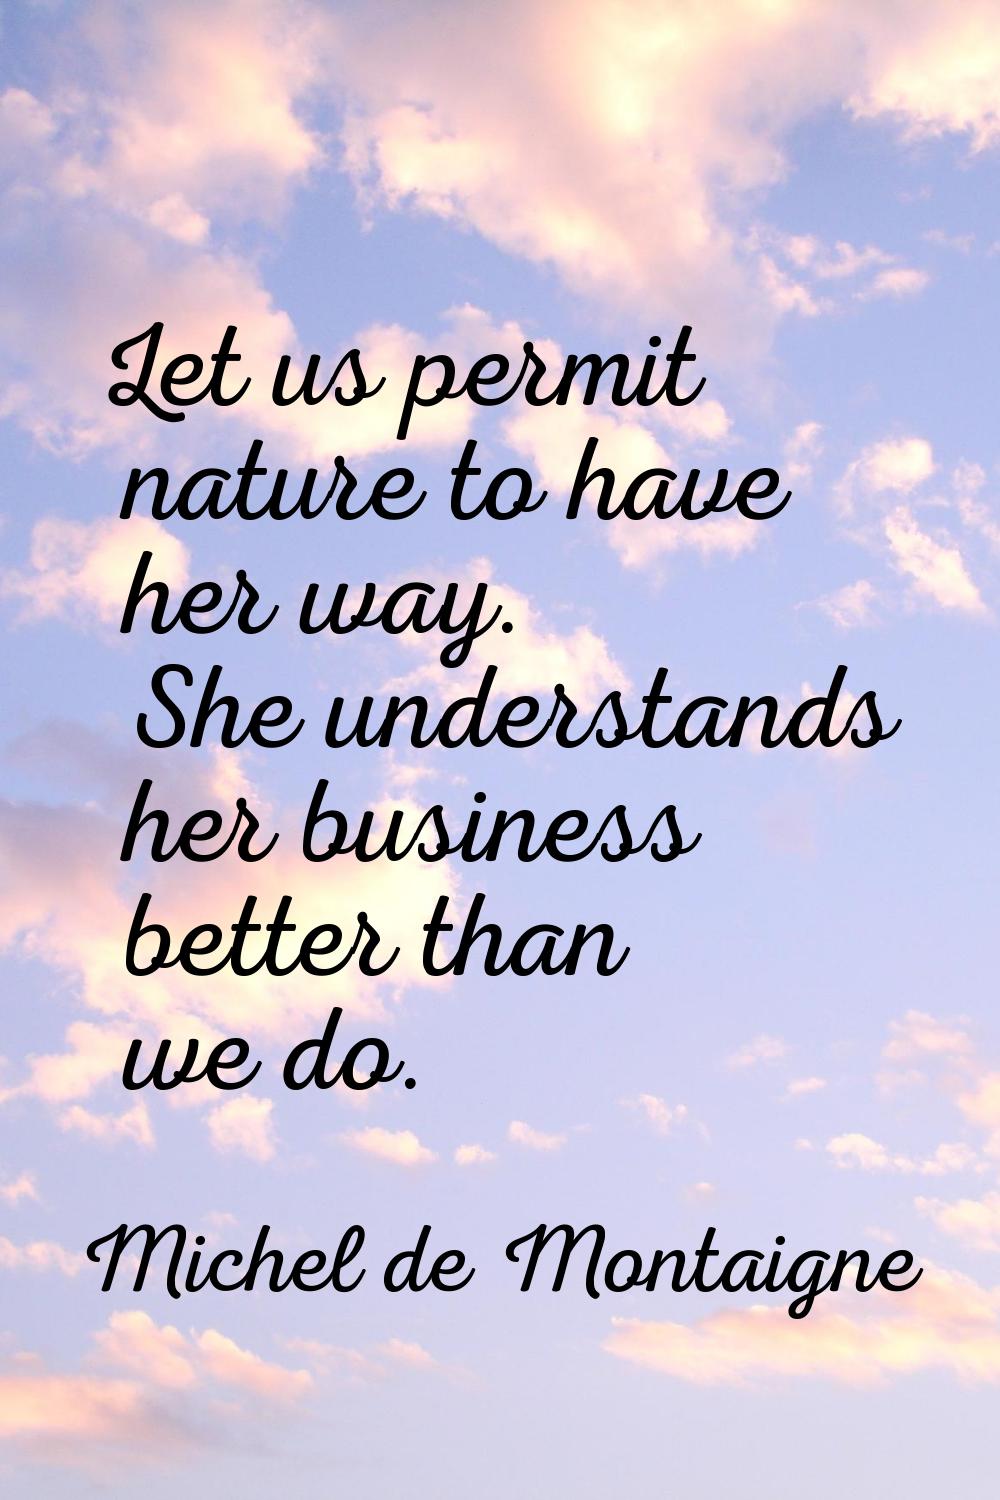 Let us permit nature to have her way. She understands her business better than we do.